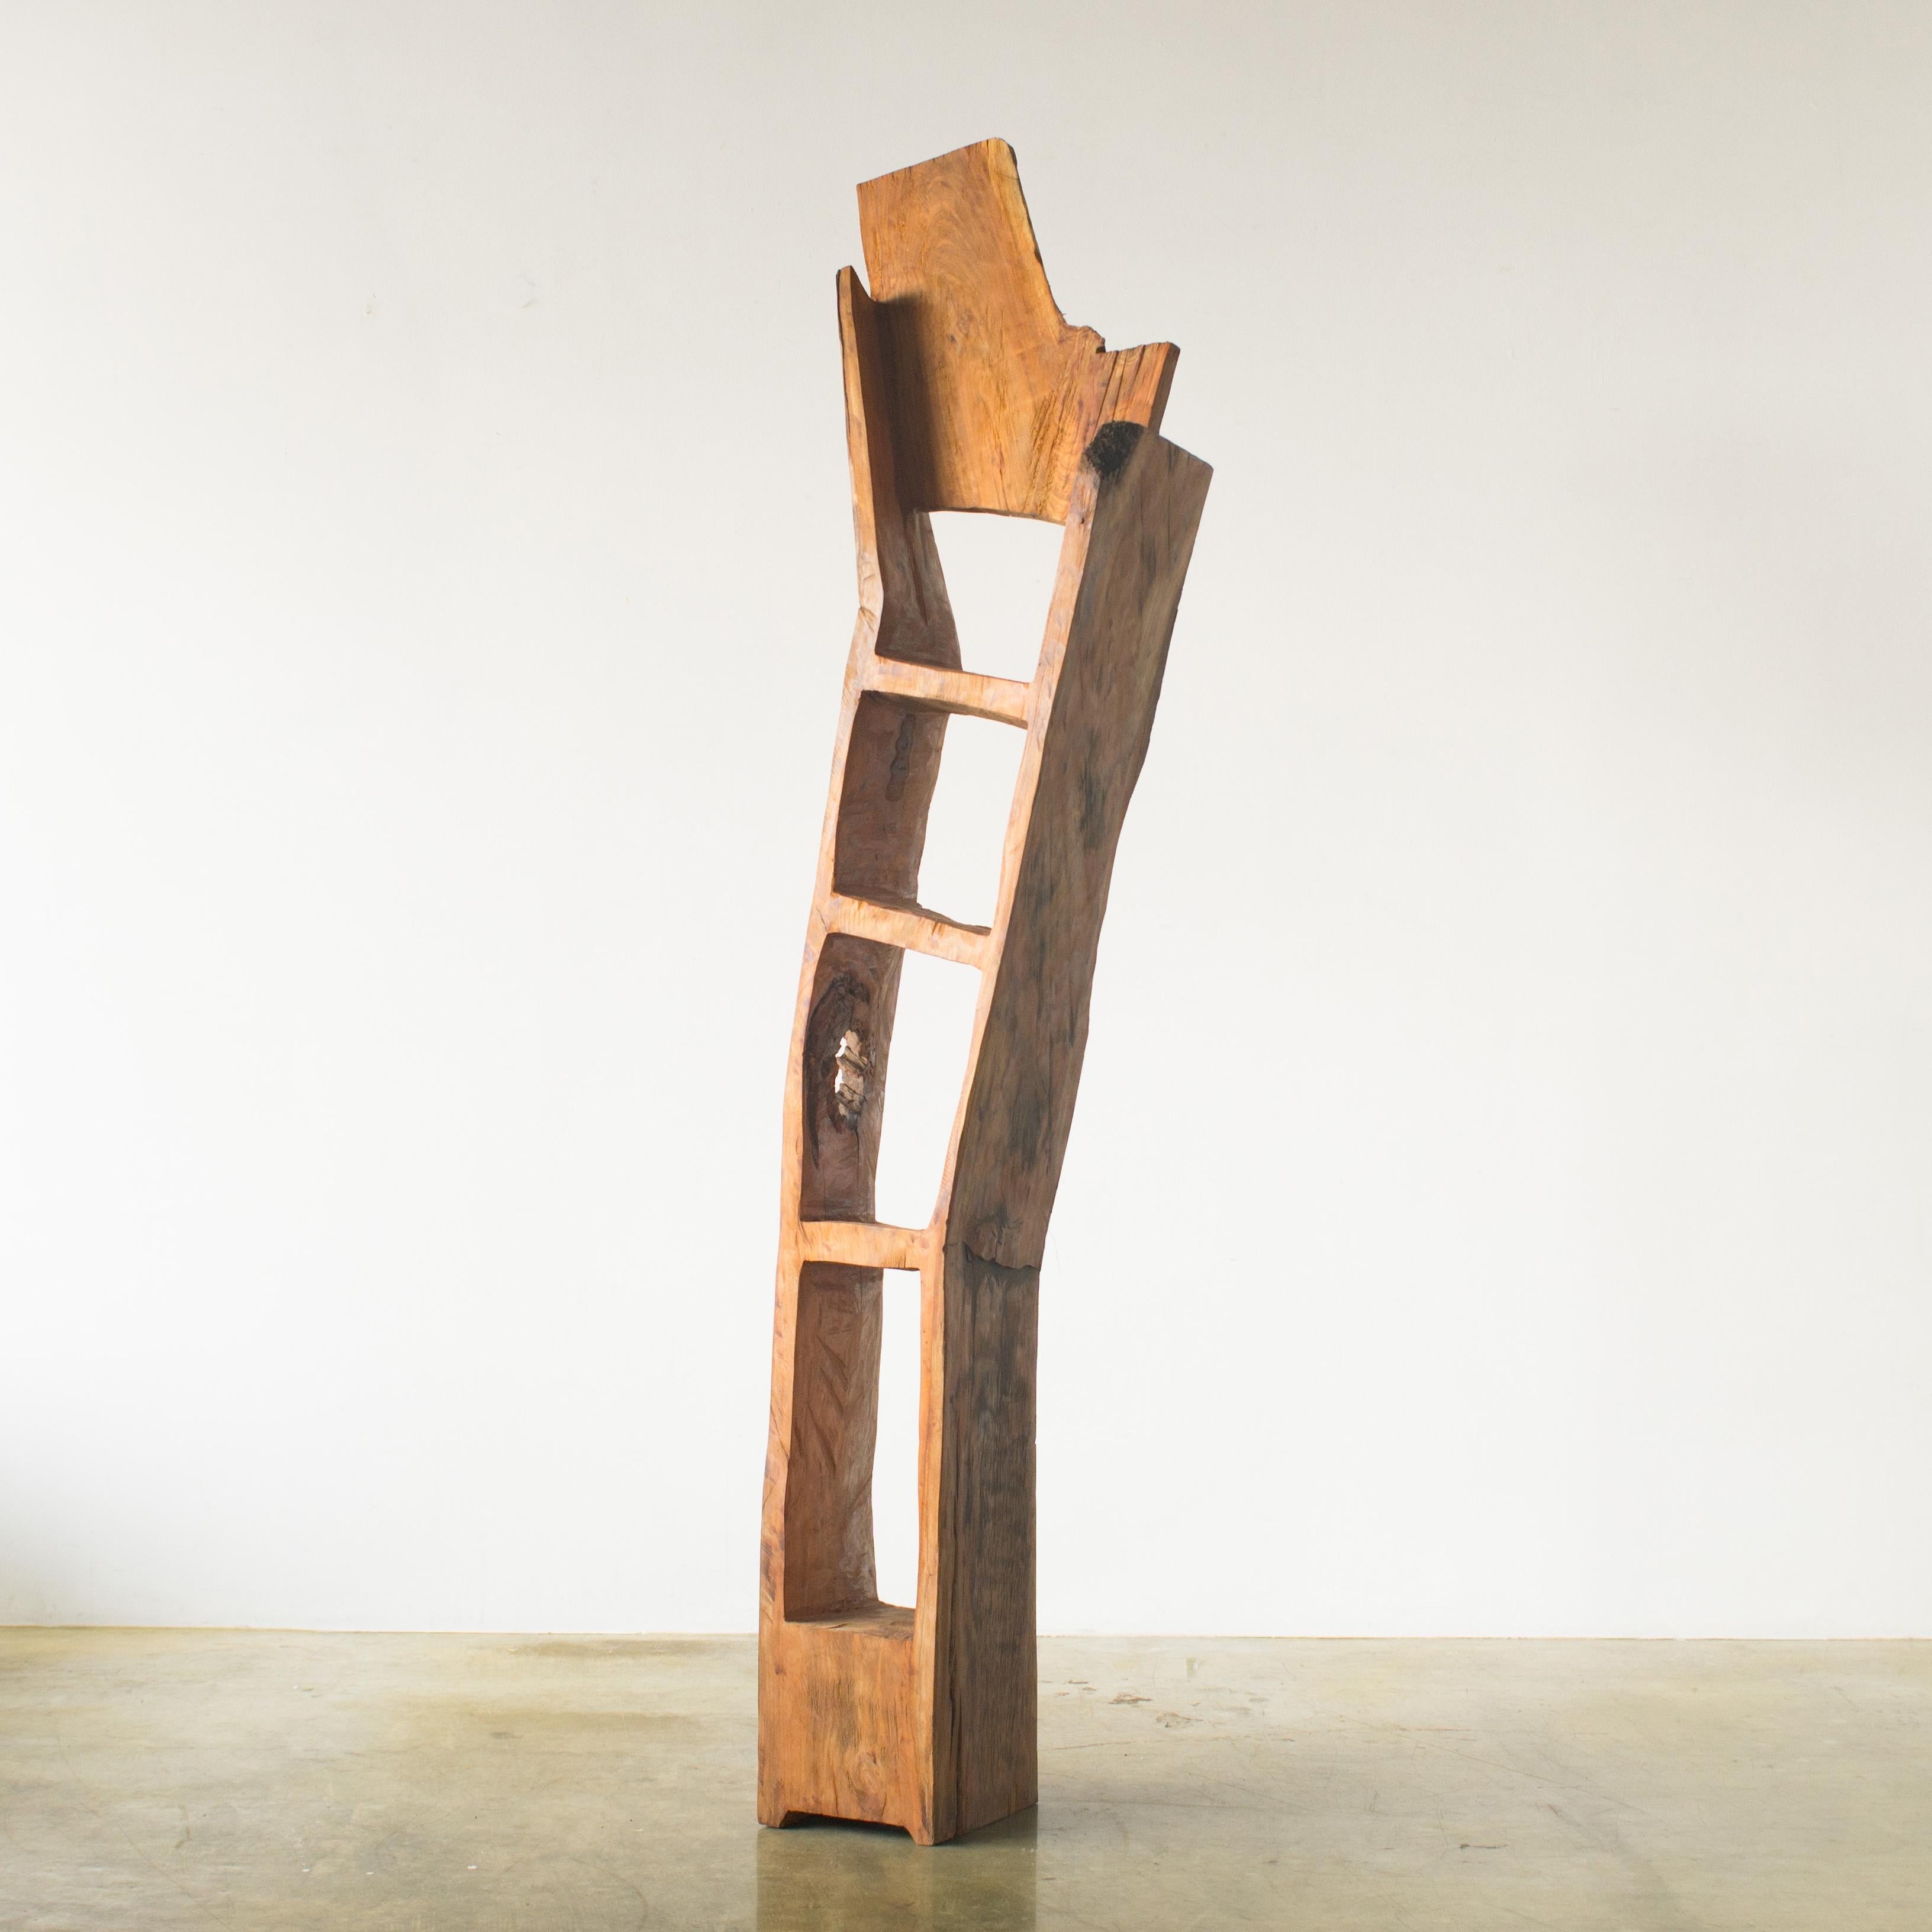 Mr. Tower Y
Sculpture by Hiroyuki Nishimura.
Material Yoshino cherry
This work is carved from log with some kinds of chainsaws.
Most of wood used for his works are unable to use anything, these woods are unsuitable material for furniture, or